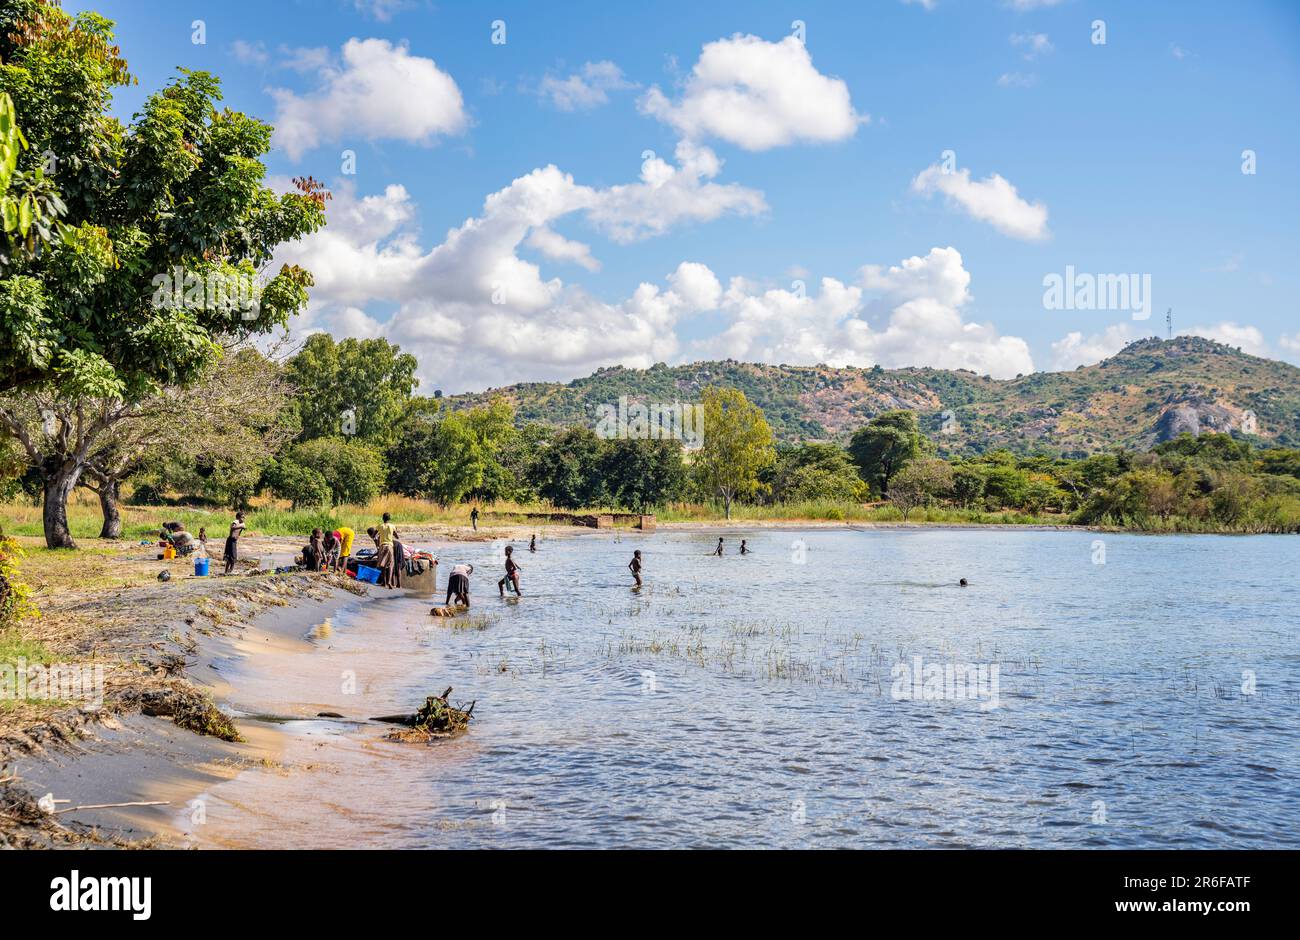 Villagers collect water and wash clothes on the shore of lake Malawi Stock Photo